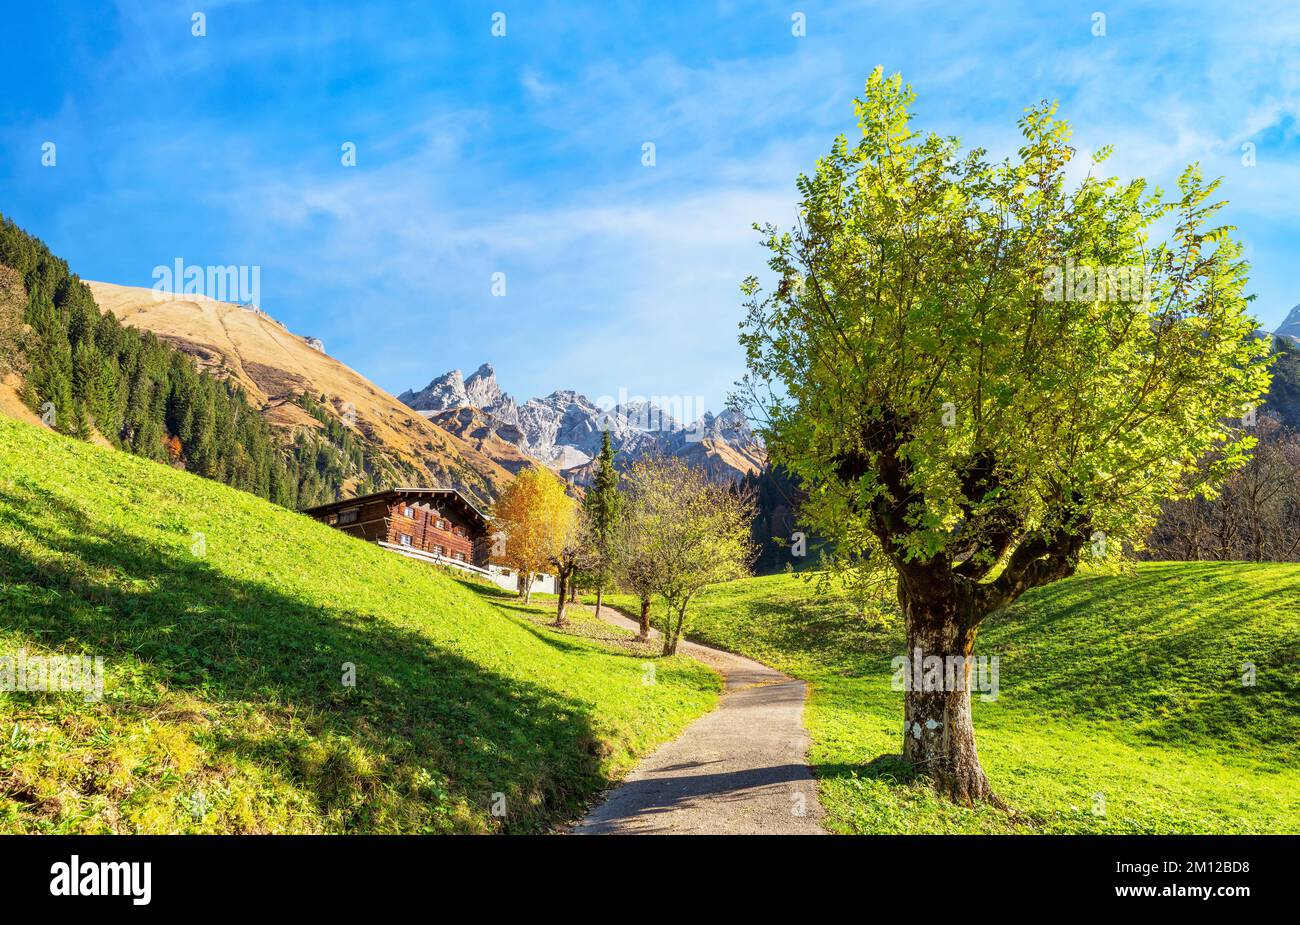 Sunny autumn day in the mountains. View from idyllic Einödsbach to the Allgäu High Alps with Trettachspitze, Mädelegabel and Hochfrottspitze. Bavaria, Germany, Europe Stock Photo